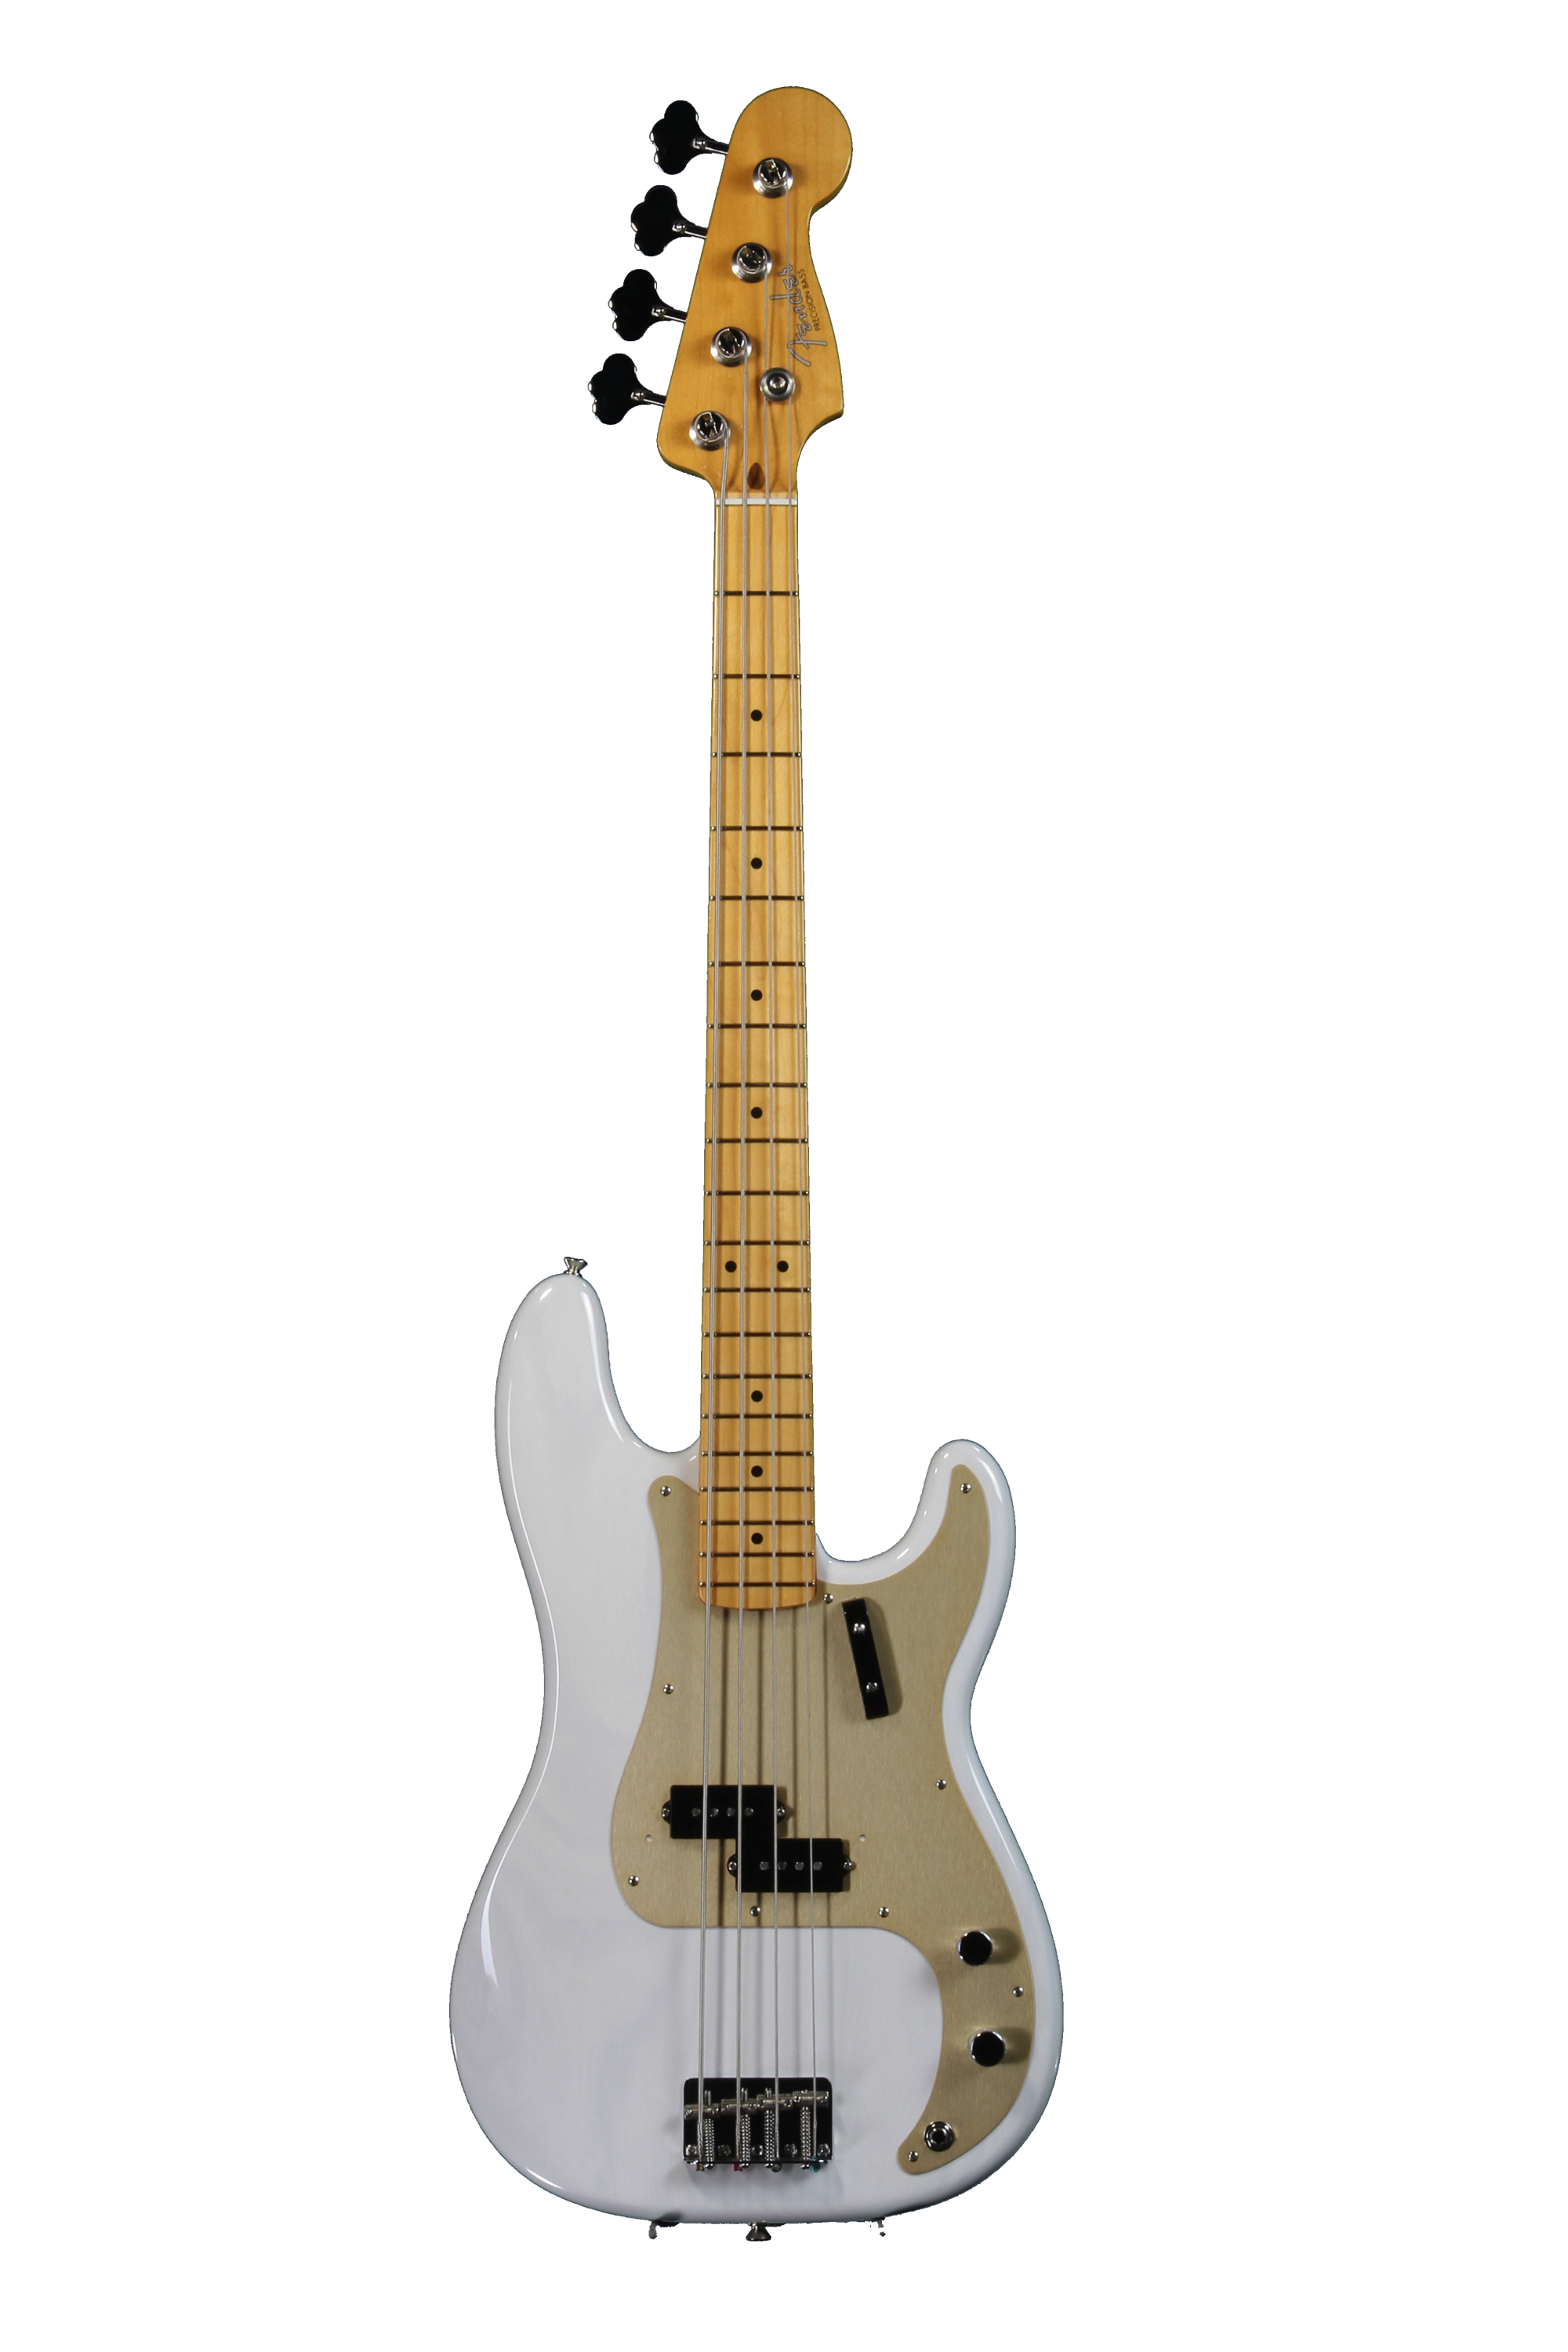 Fender American Vintage '57 Precision Bass - White Blonde | Sweetwater